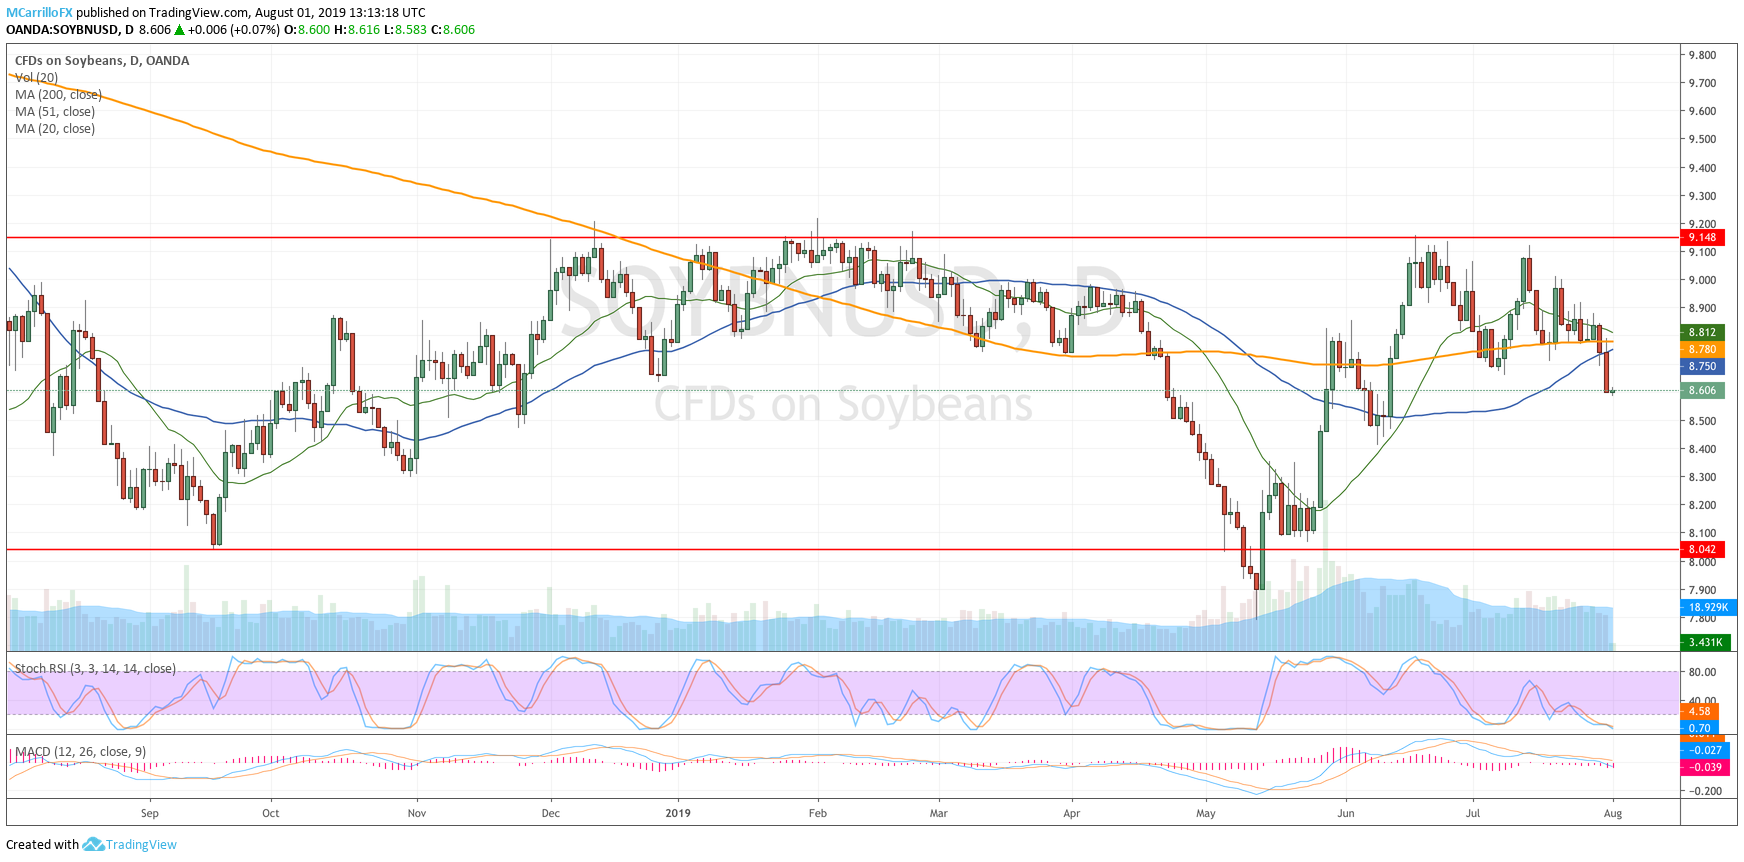 Prices of Soybeans daily chart August 1